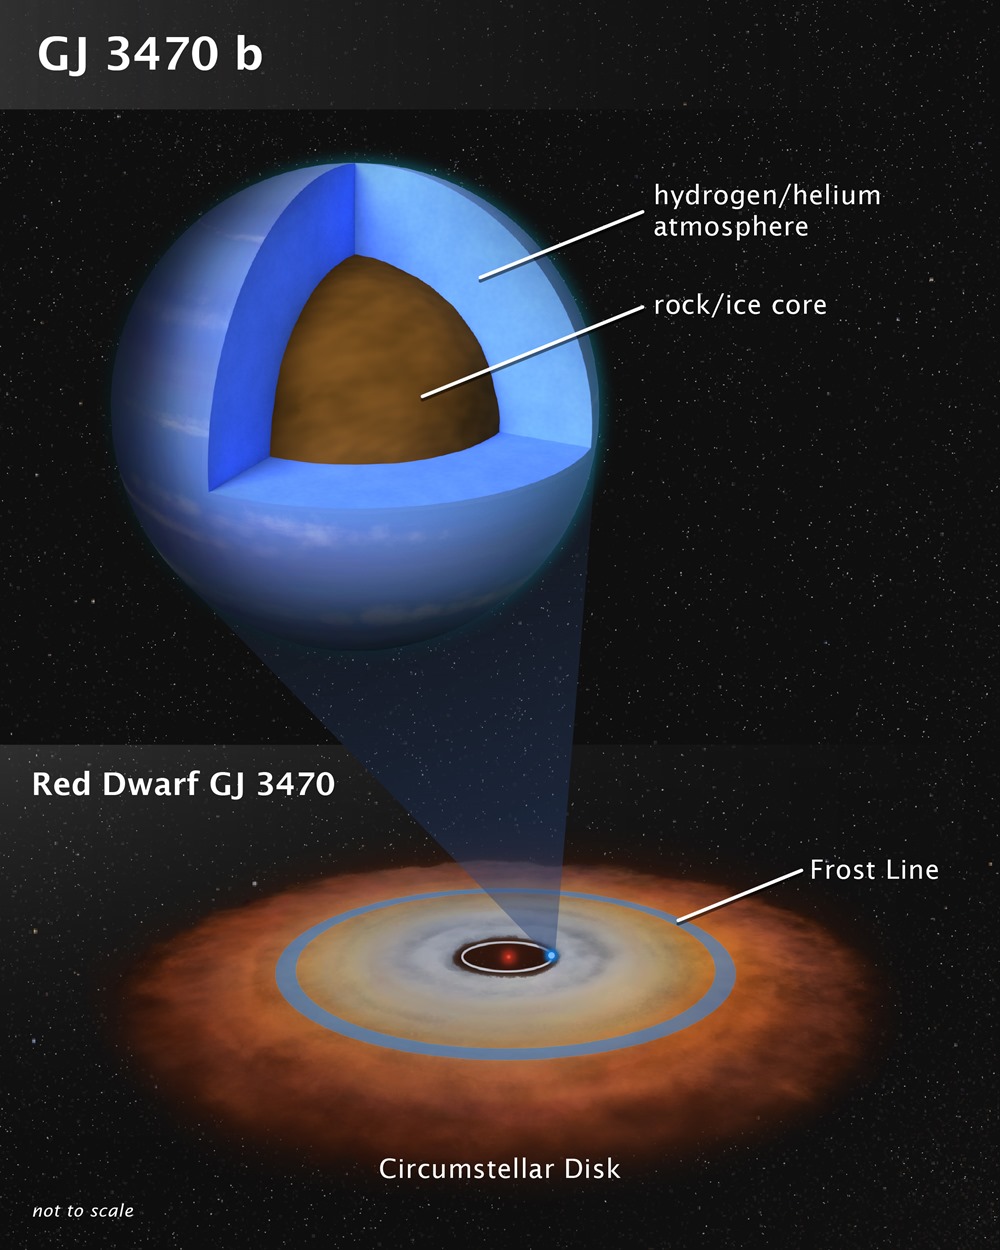 NASA's Great Observatories Probe New Class of Exoplanet